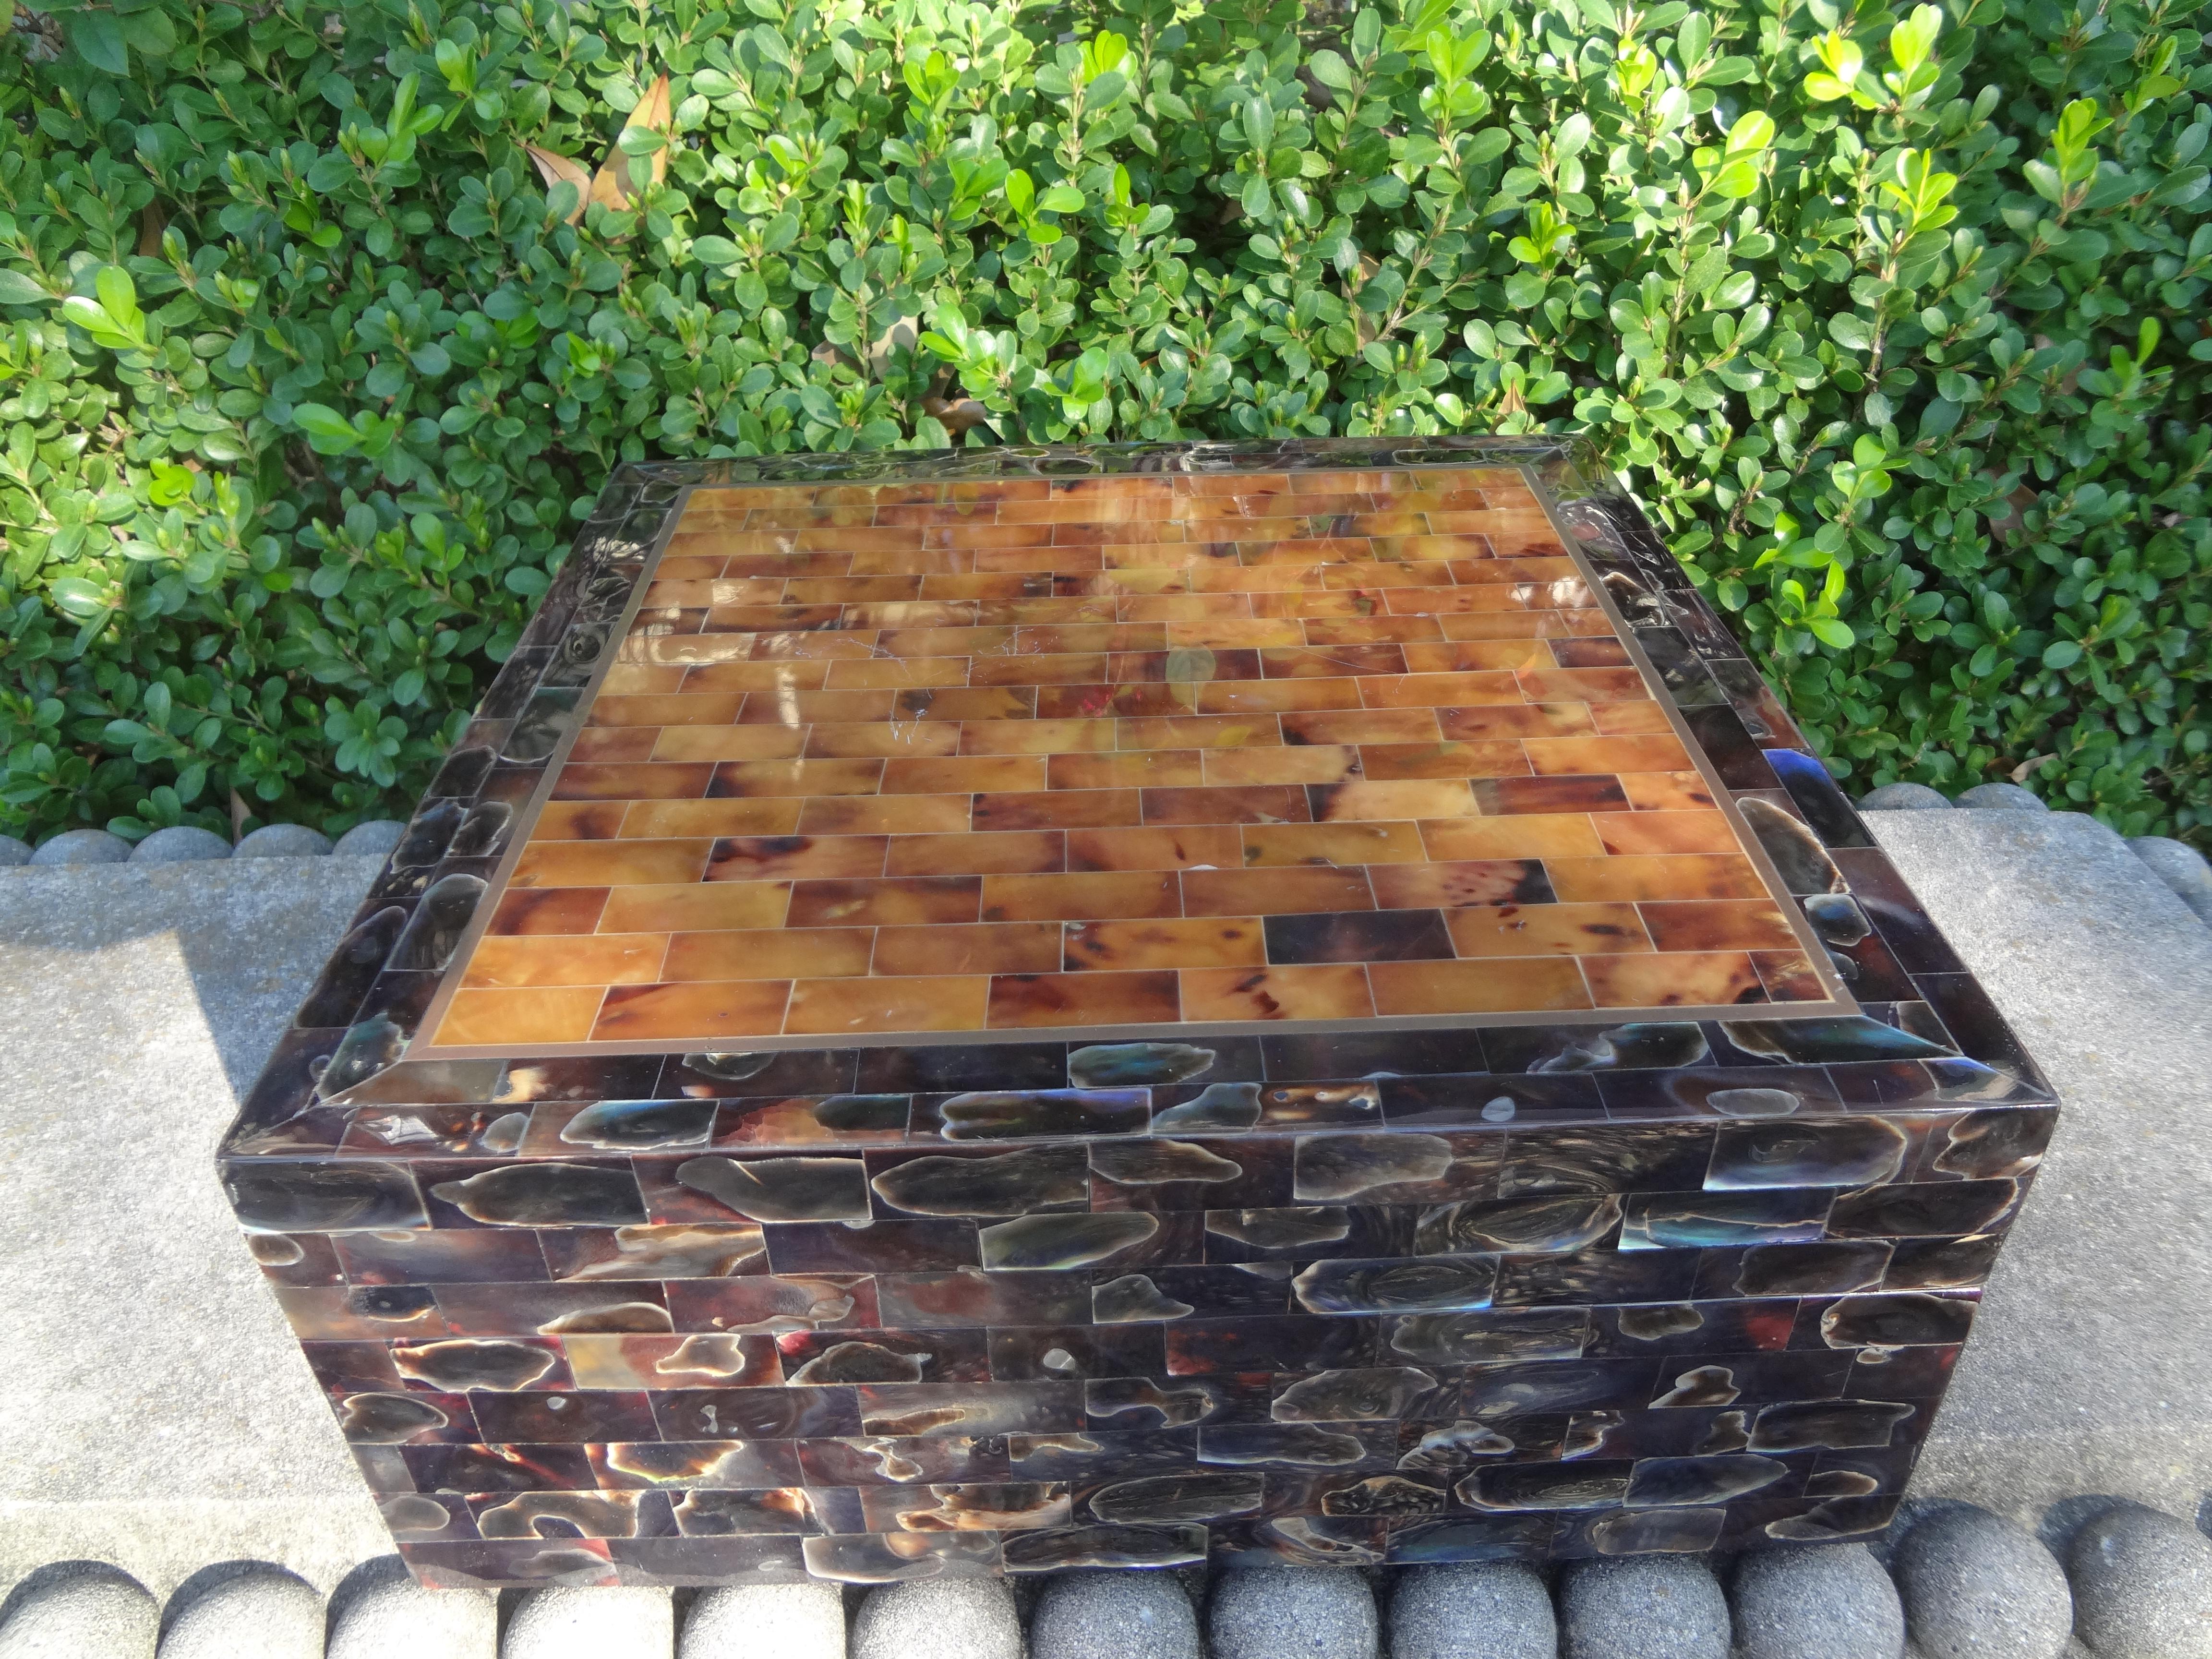 Vintage Maitland-Smith Tessellated Horn Box.
This handsome large Maitland Smith decorative square box or jewelry box is in great condition and makes a great coffee table accessory.